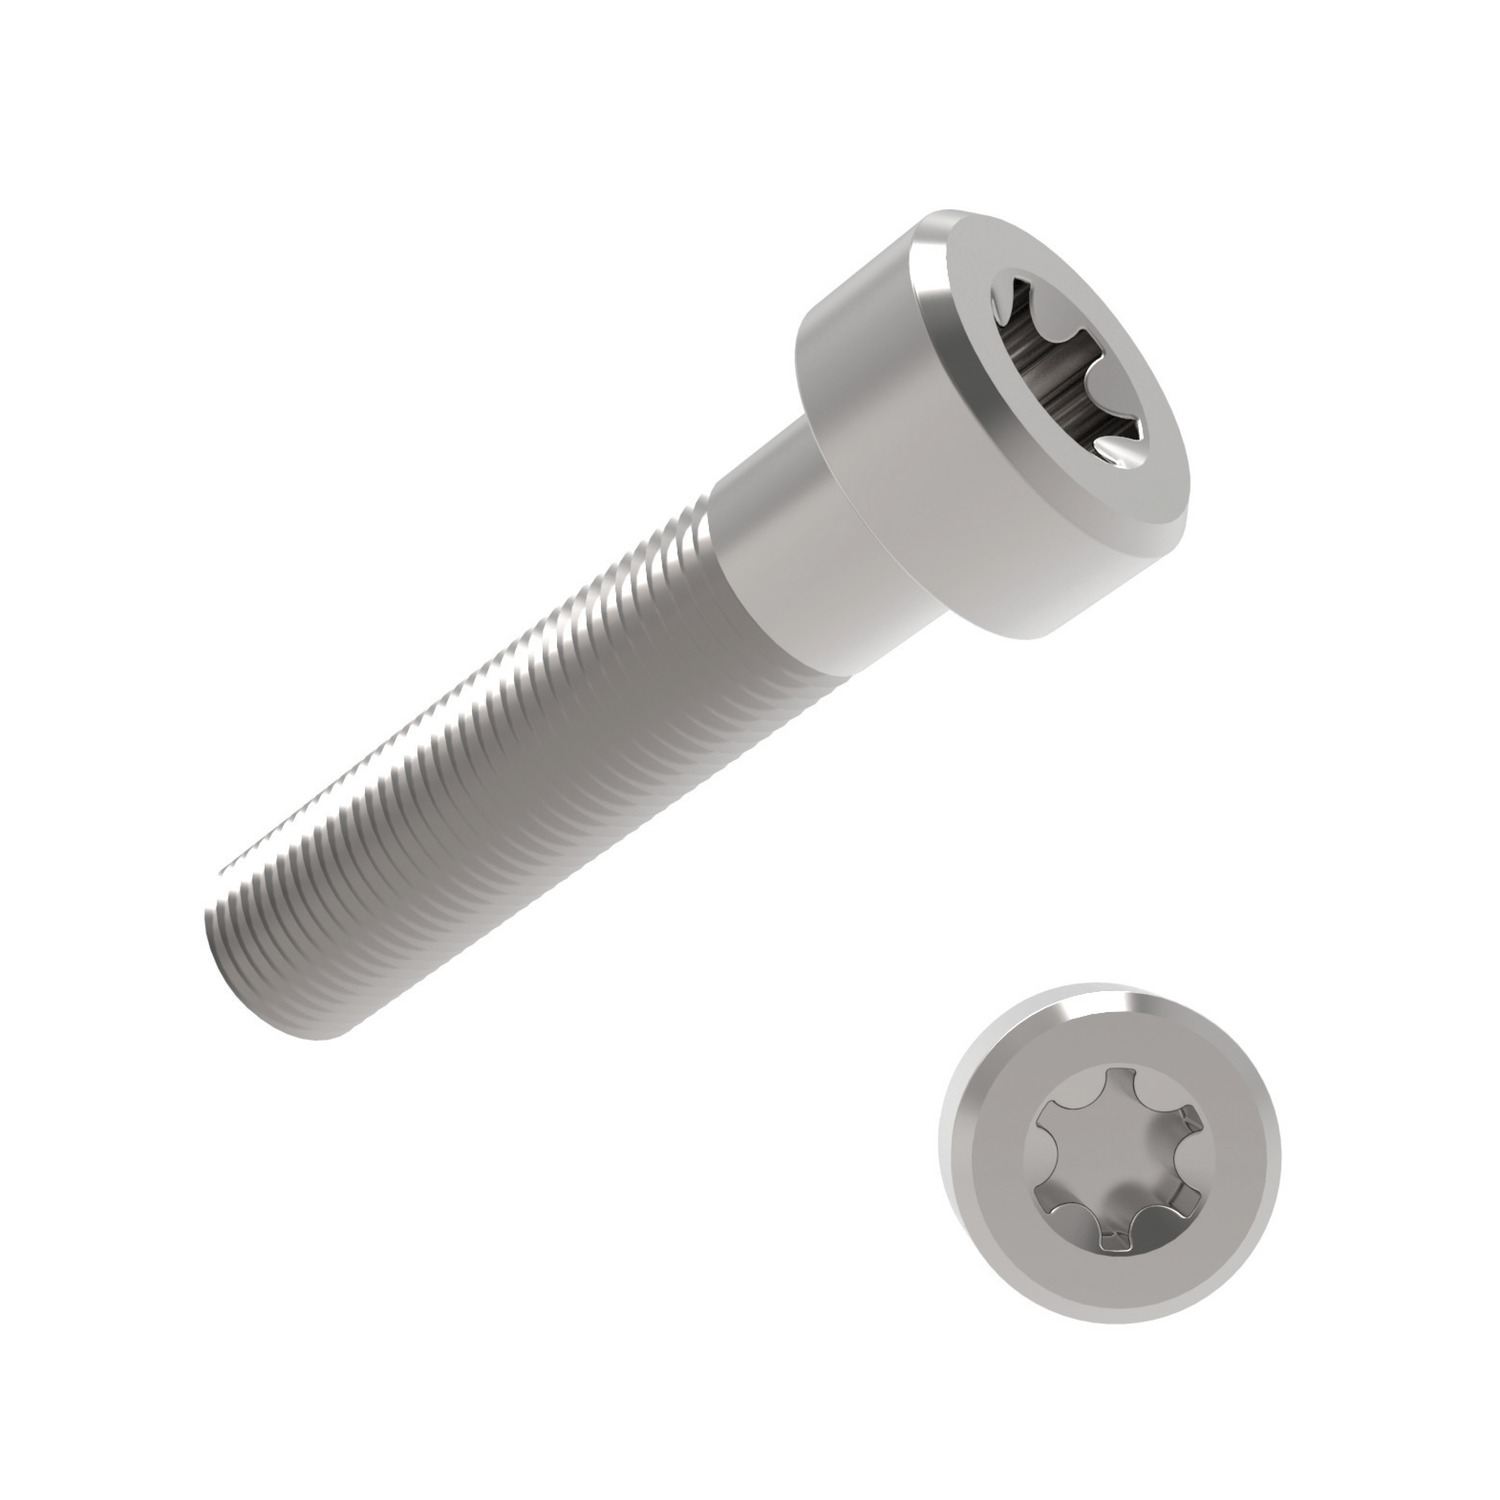 TX Cap Screws Stainless Steel A2. To DIN 14580. For the majority ofscrew lengths the threads goes allthe way to the head of the screw (i.e.l1 = l2). For longer length screws thethreaded portion l2 1. Also available in Stainless Steel A4 (P0206.A4)